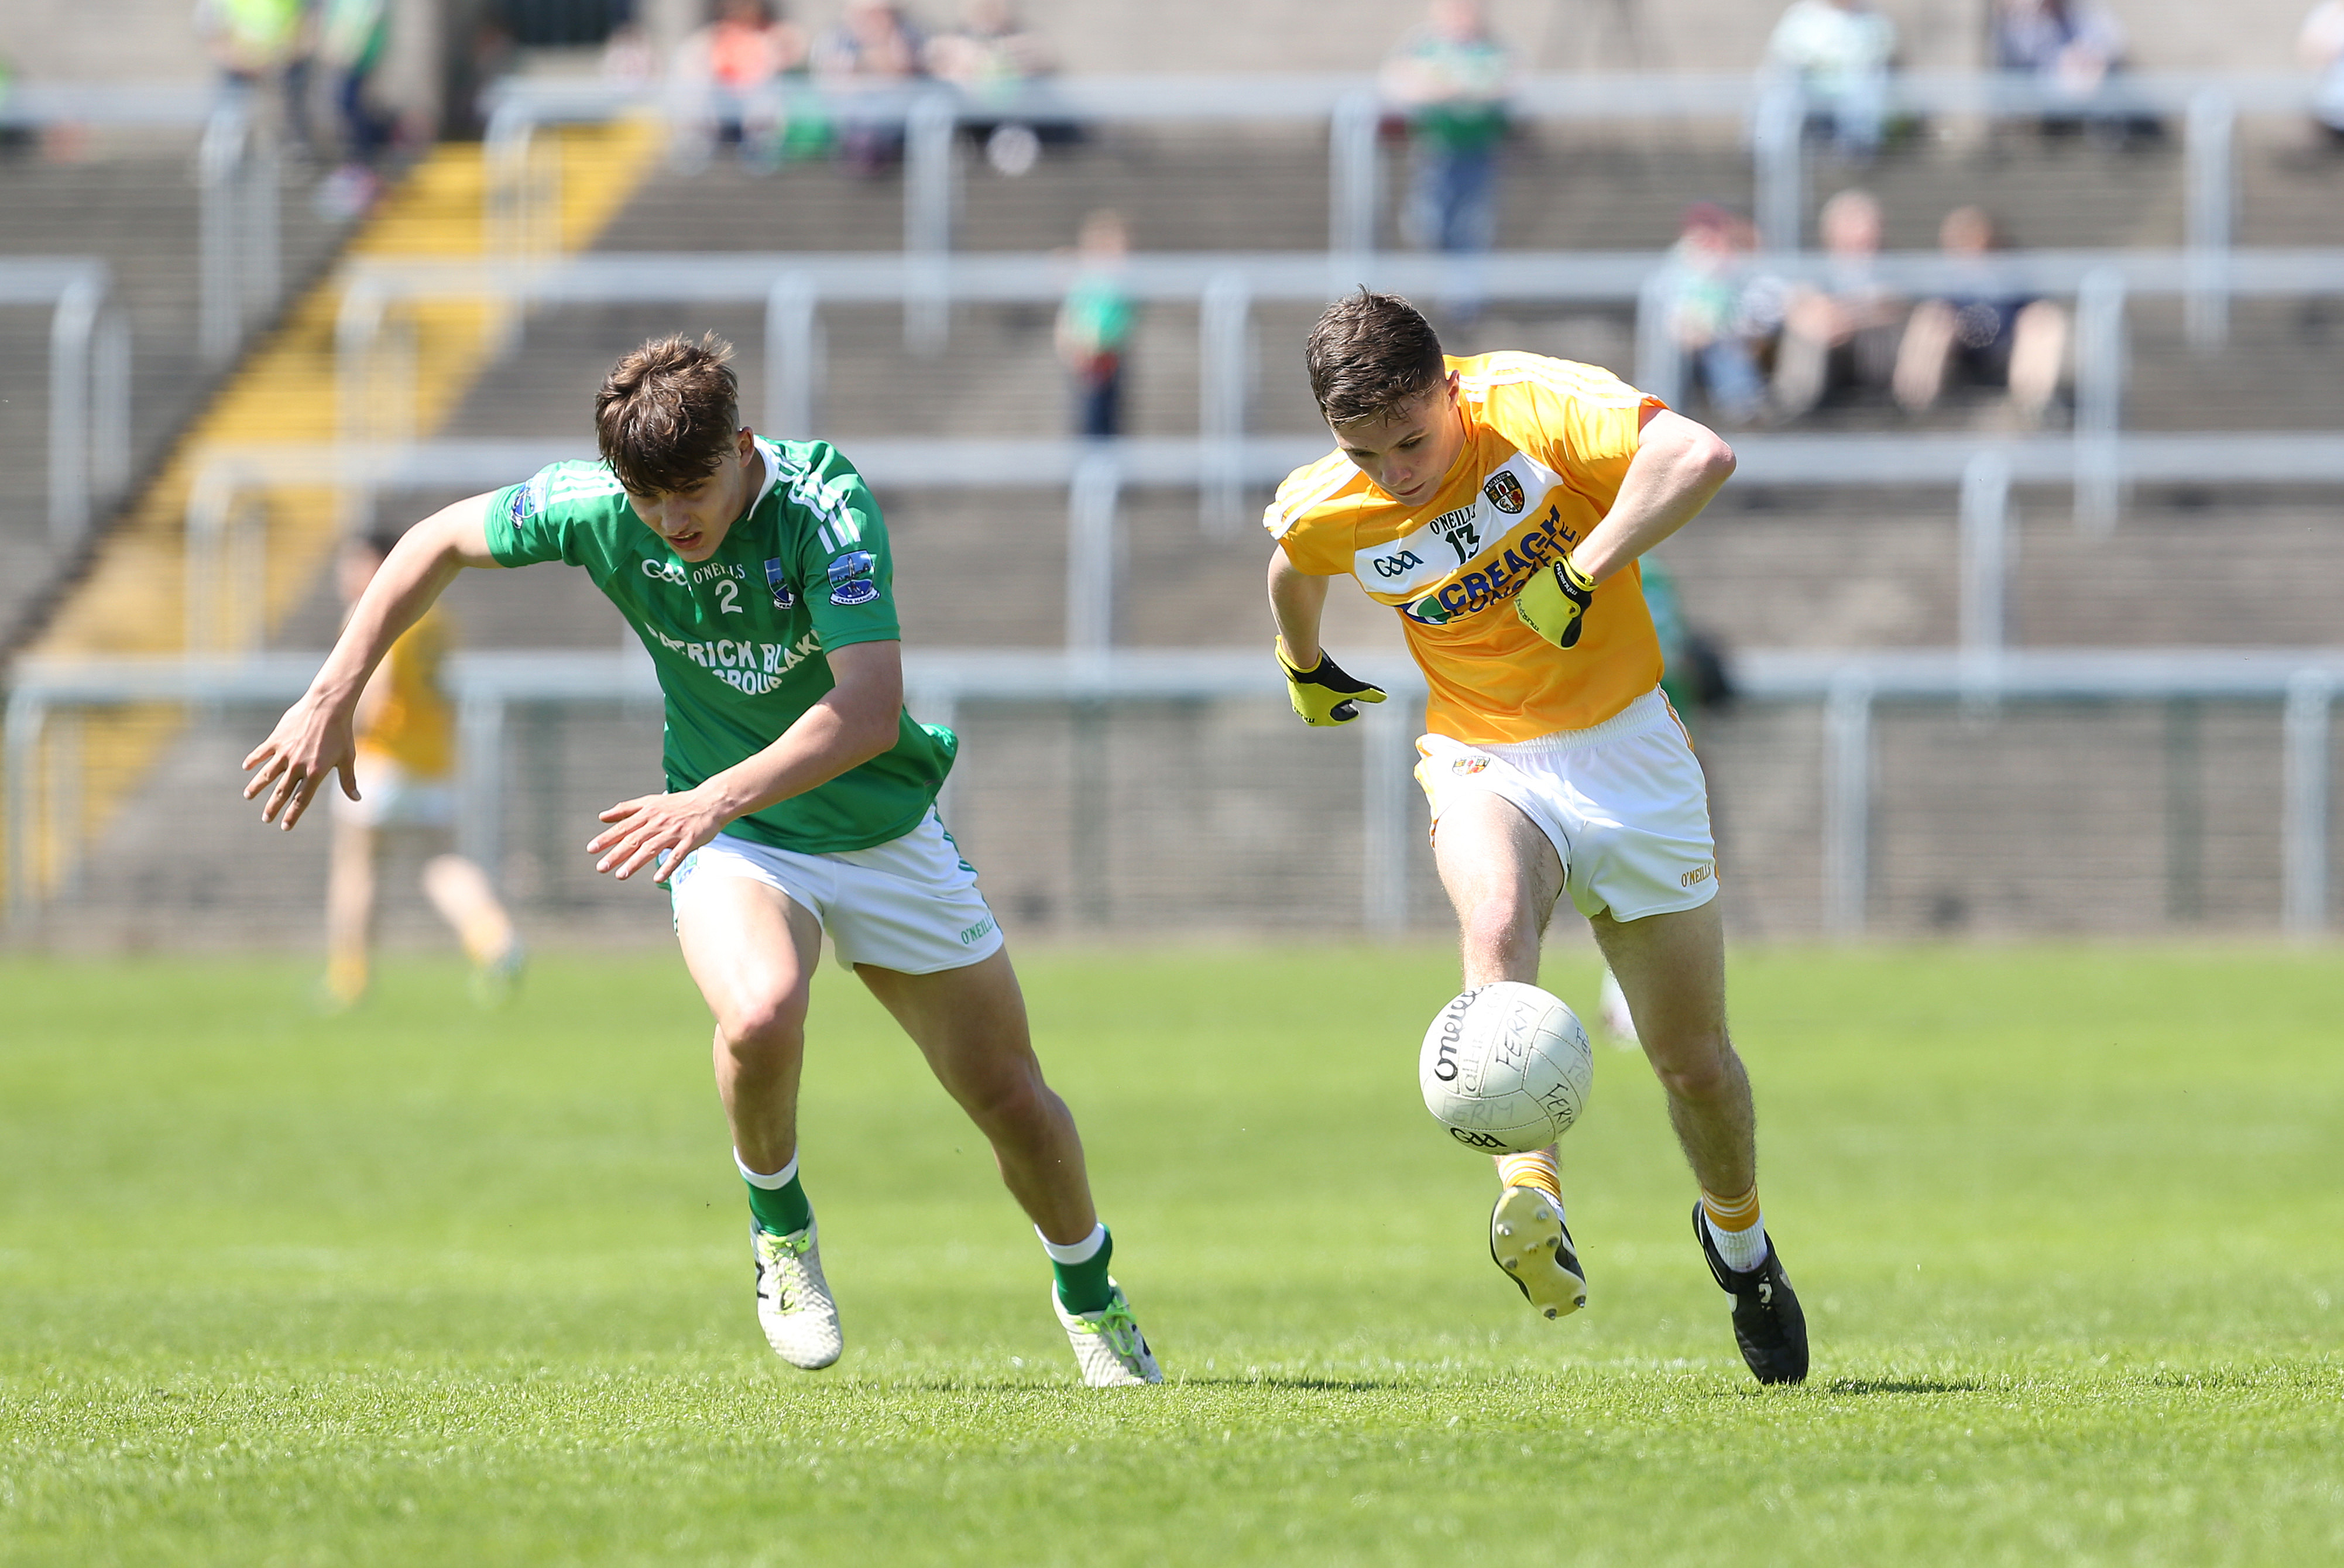 Antrim forward Liam Quinn, pictured in action against Fermanagh’s Johnny Cassidy, will miss Sunday’s Ulster MFC quarter-final tie against Donegal after breaking his ankle against the Ernemen